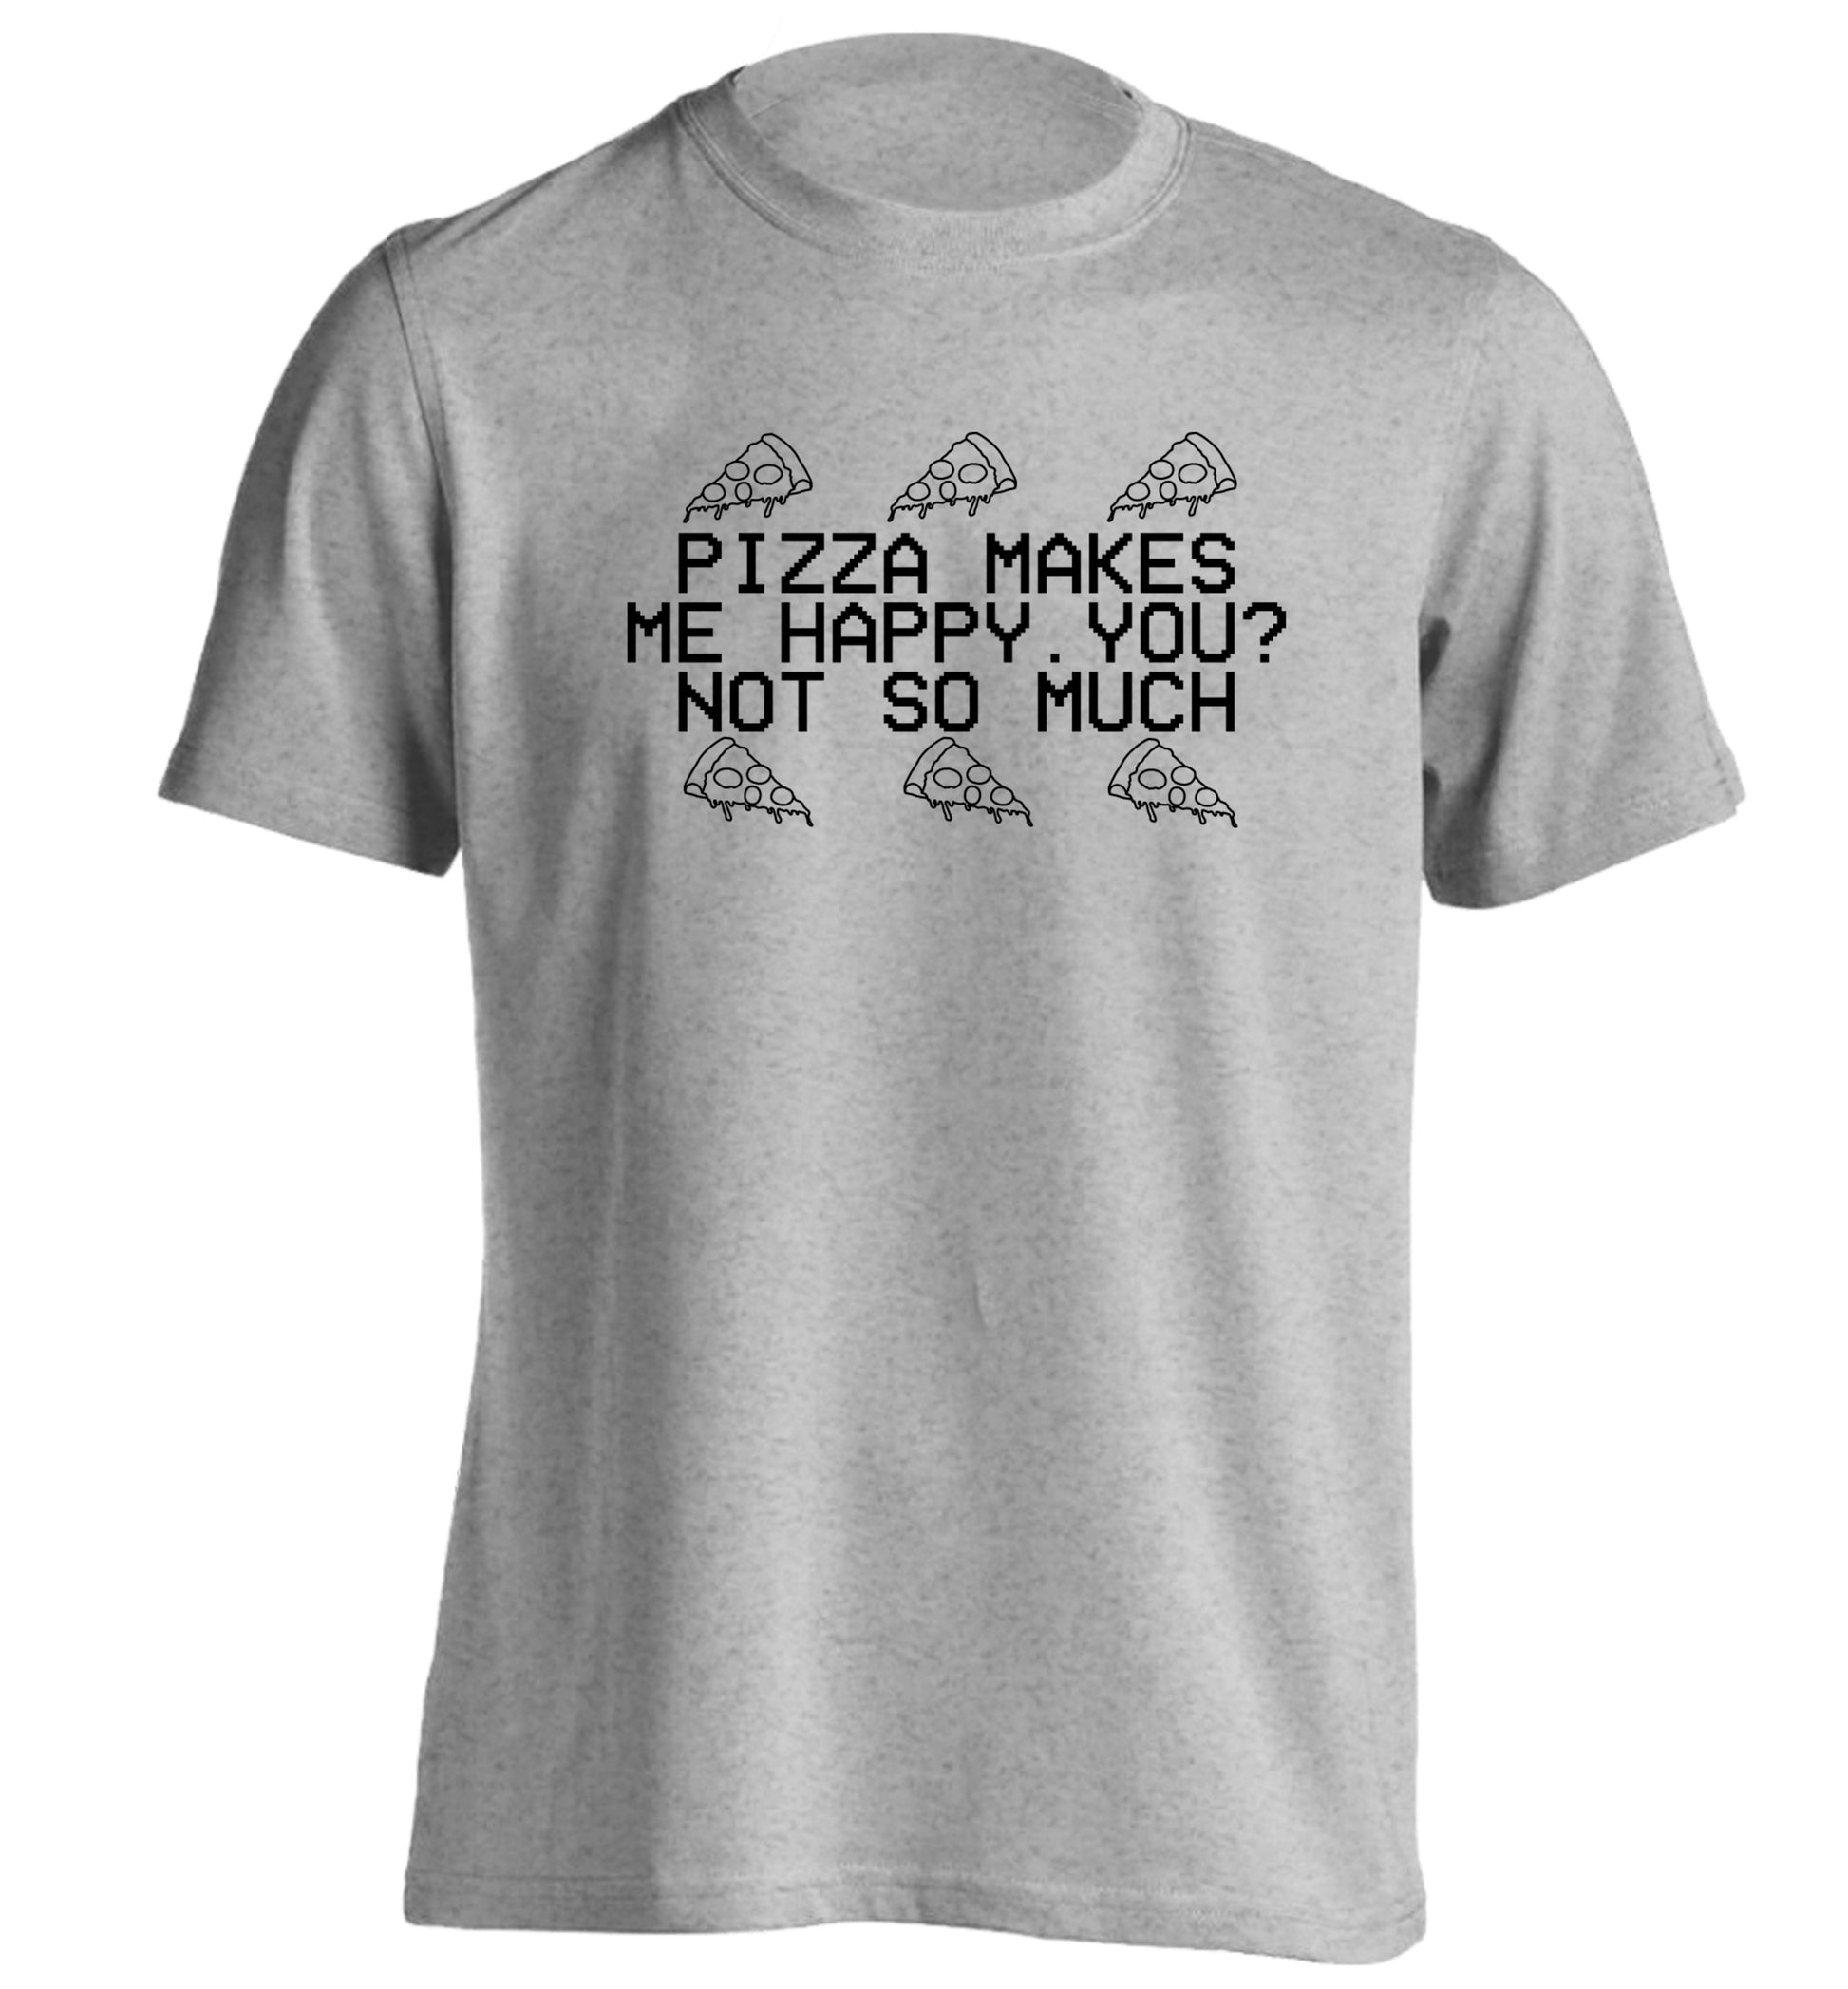 Pizza makes me happy, You? Not so much adults unisex grey Tshirt 2XL